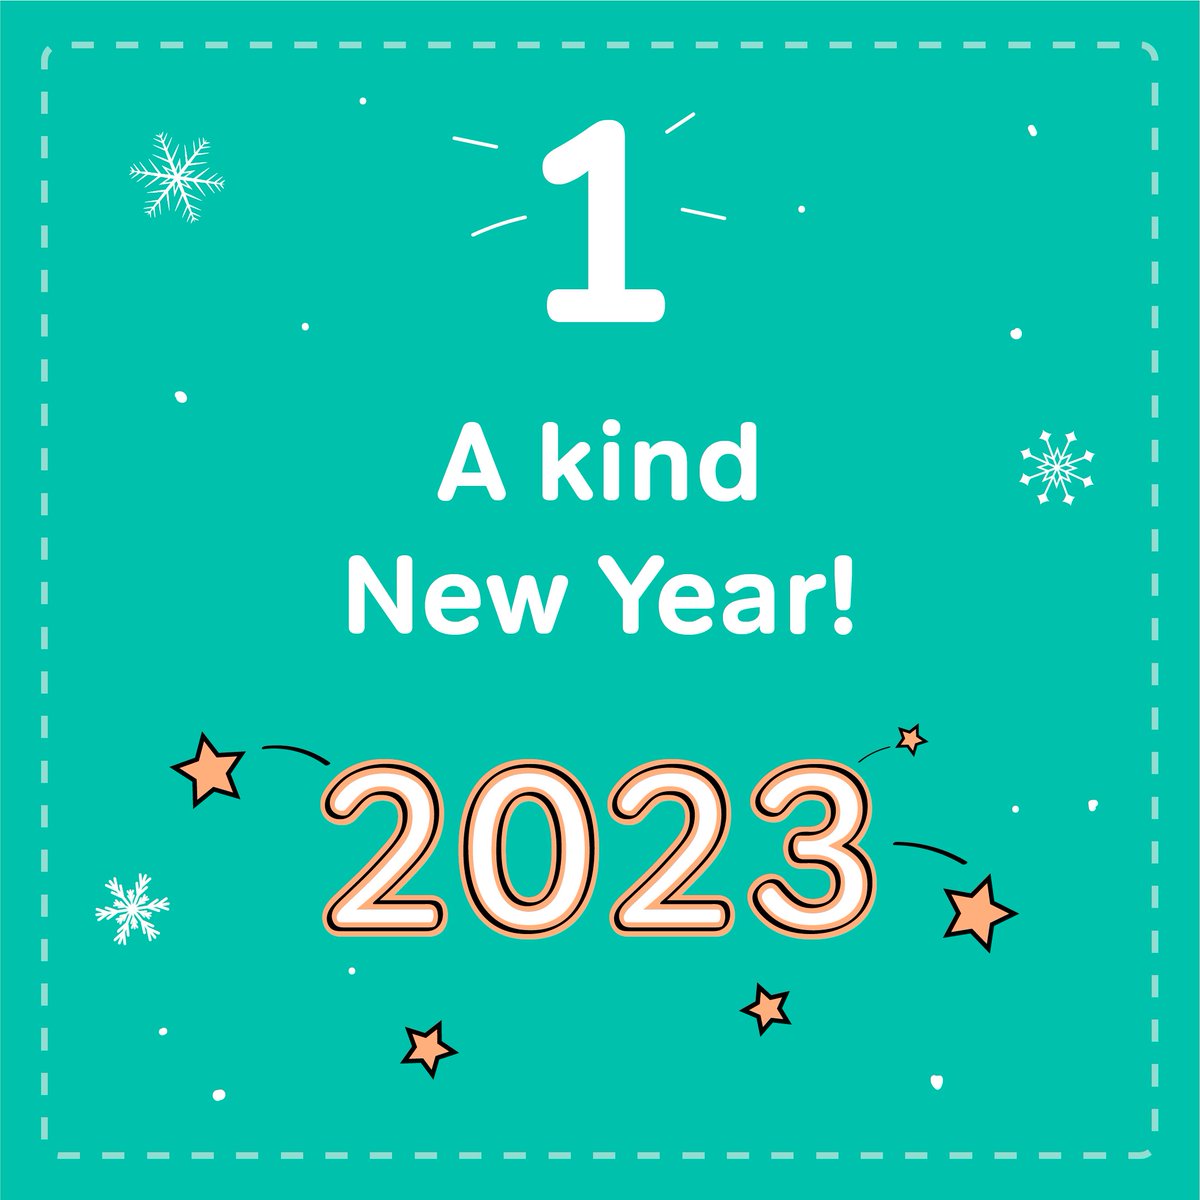 There’s no pressure to celebrate, set resolutions or make big changes, just because it’s a new year. #BeKind to yourself today, all month and maybe all year!. #SelfKindness & #SelfCare are important for our #wellbeing. 
#FestiveSeasonYourWay
#MindWellAdventCalendar